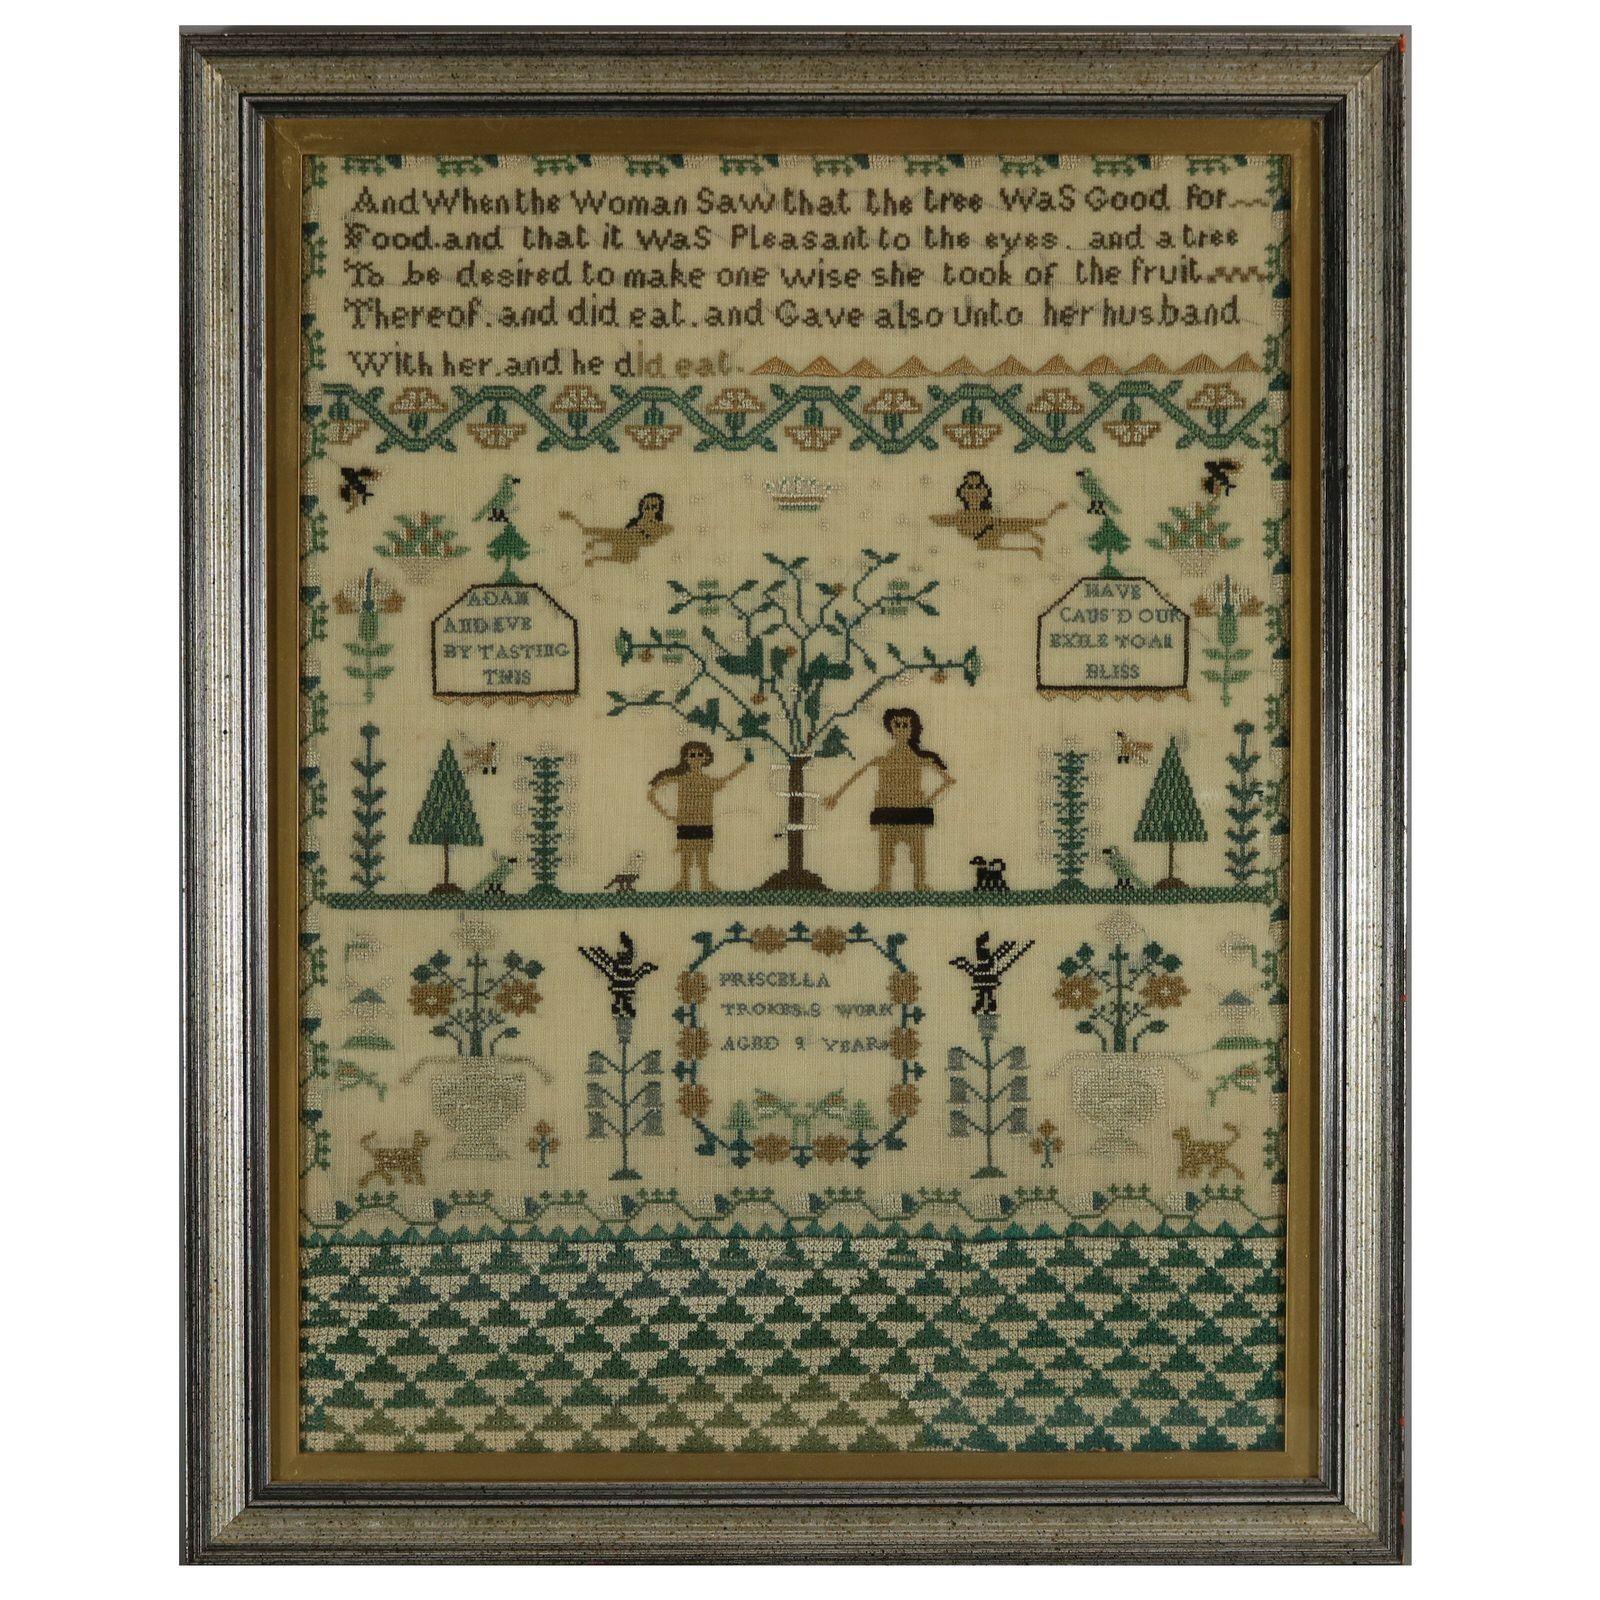 Pair of Sister Samplers, circa 1810, stitched by Priscella and H Trokes. PRISCILLA TROKES SAMPLER: This sampler is worked in silk threads on a linen ground, mainly in cross stitch. Meandering strawberry border. Colours green, light brown, dark